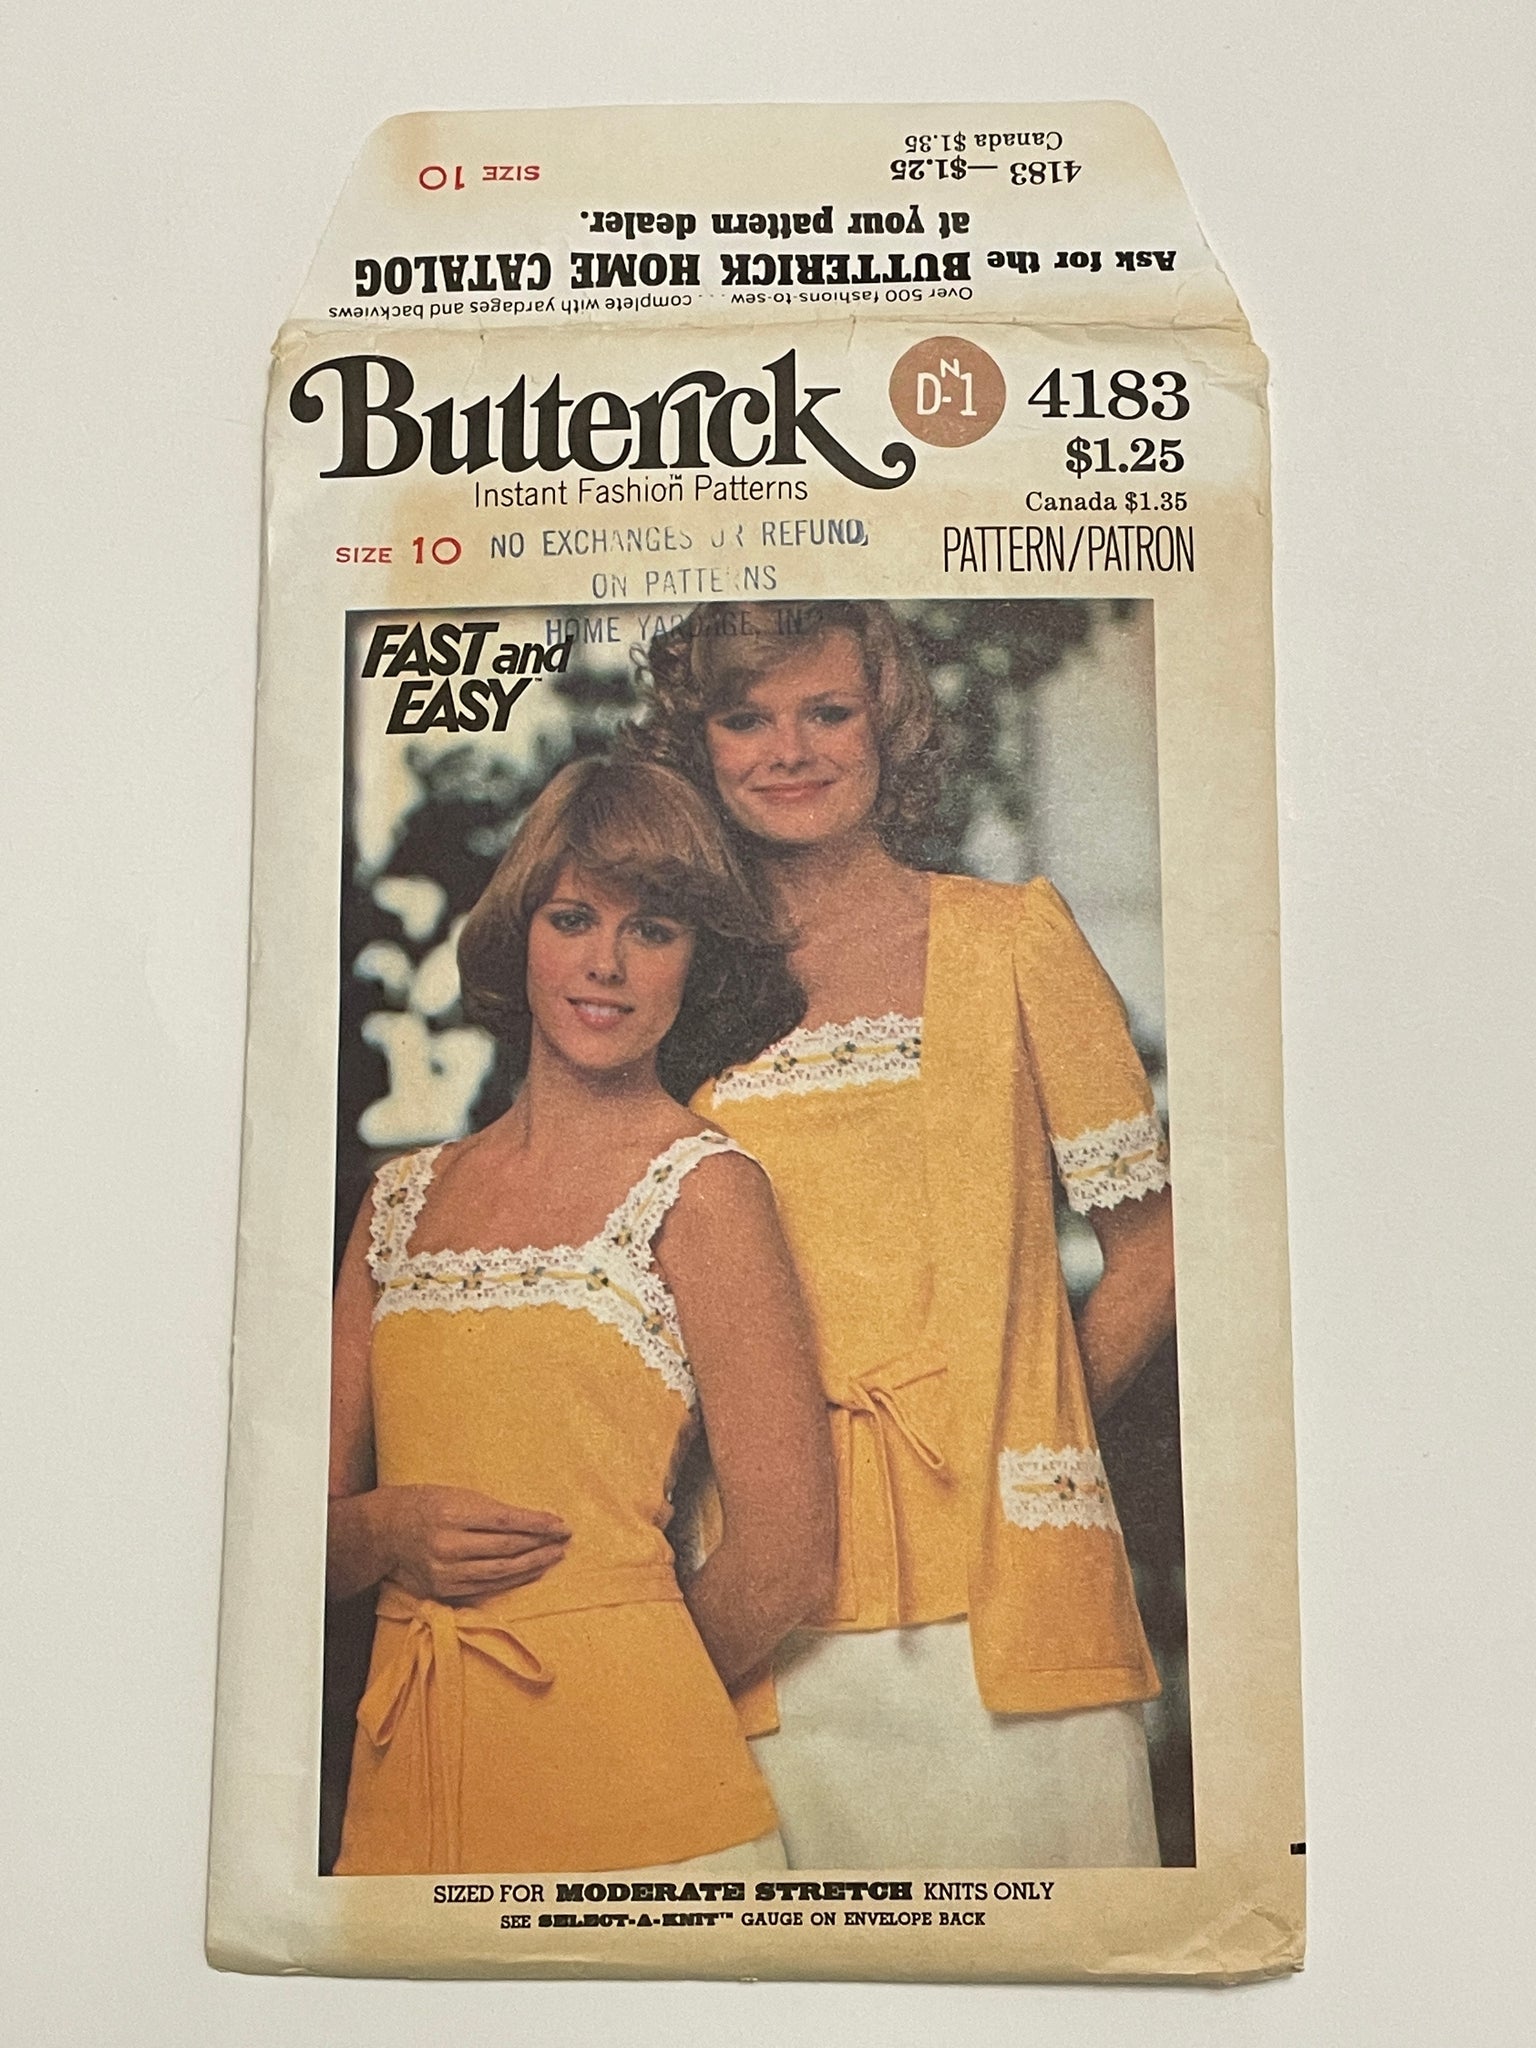 SALE 1970's Butterick Pattern 4183 - Camisole and Cardigan